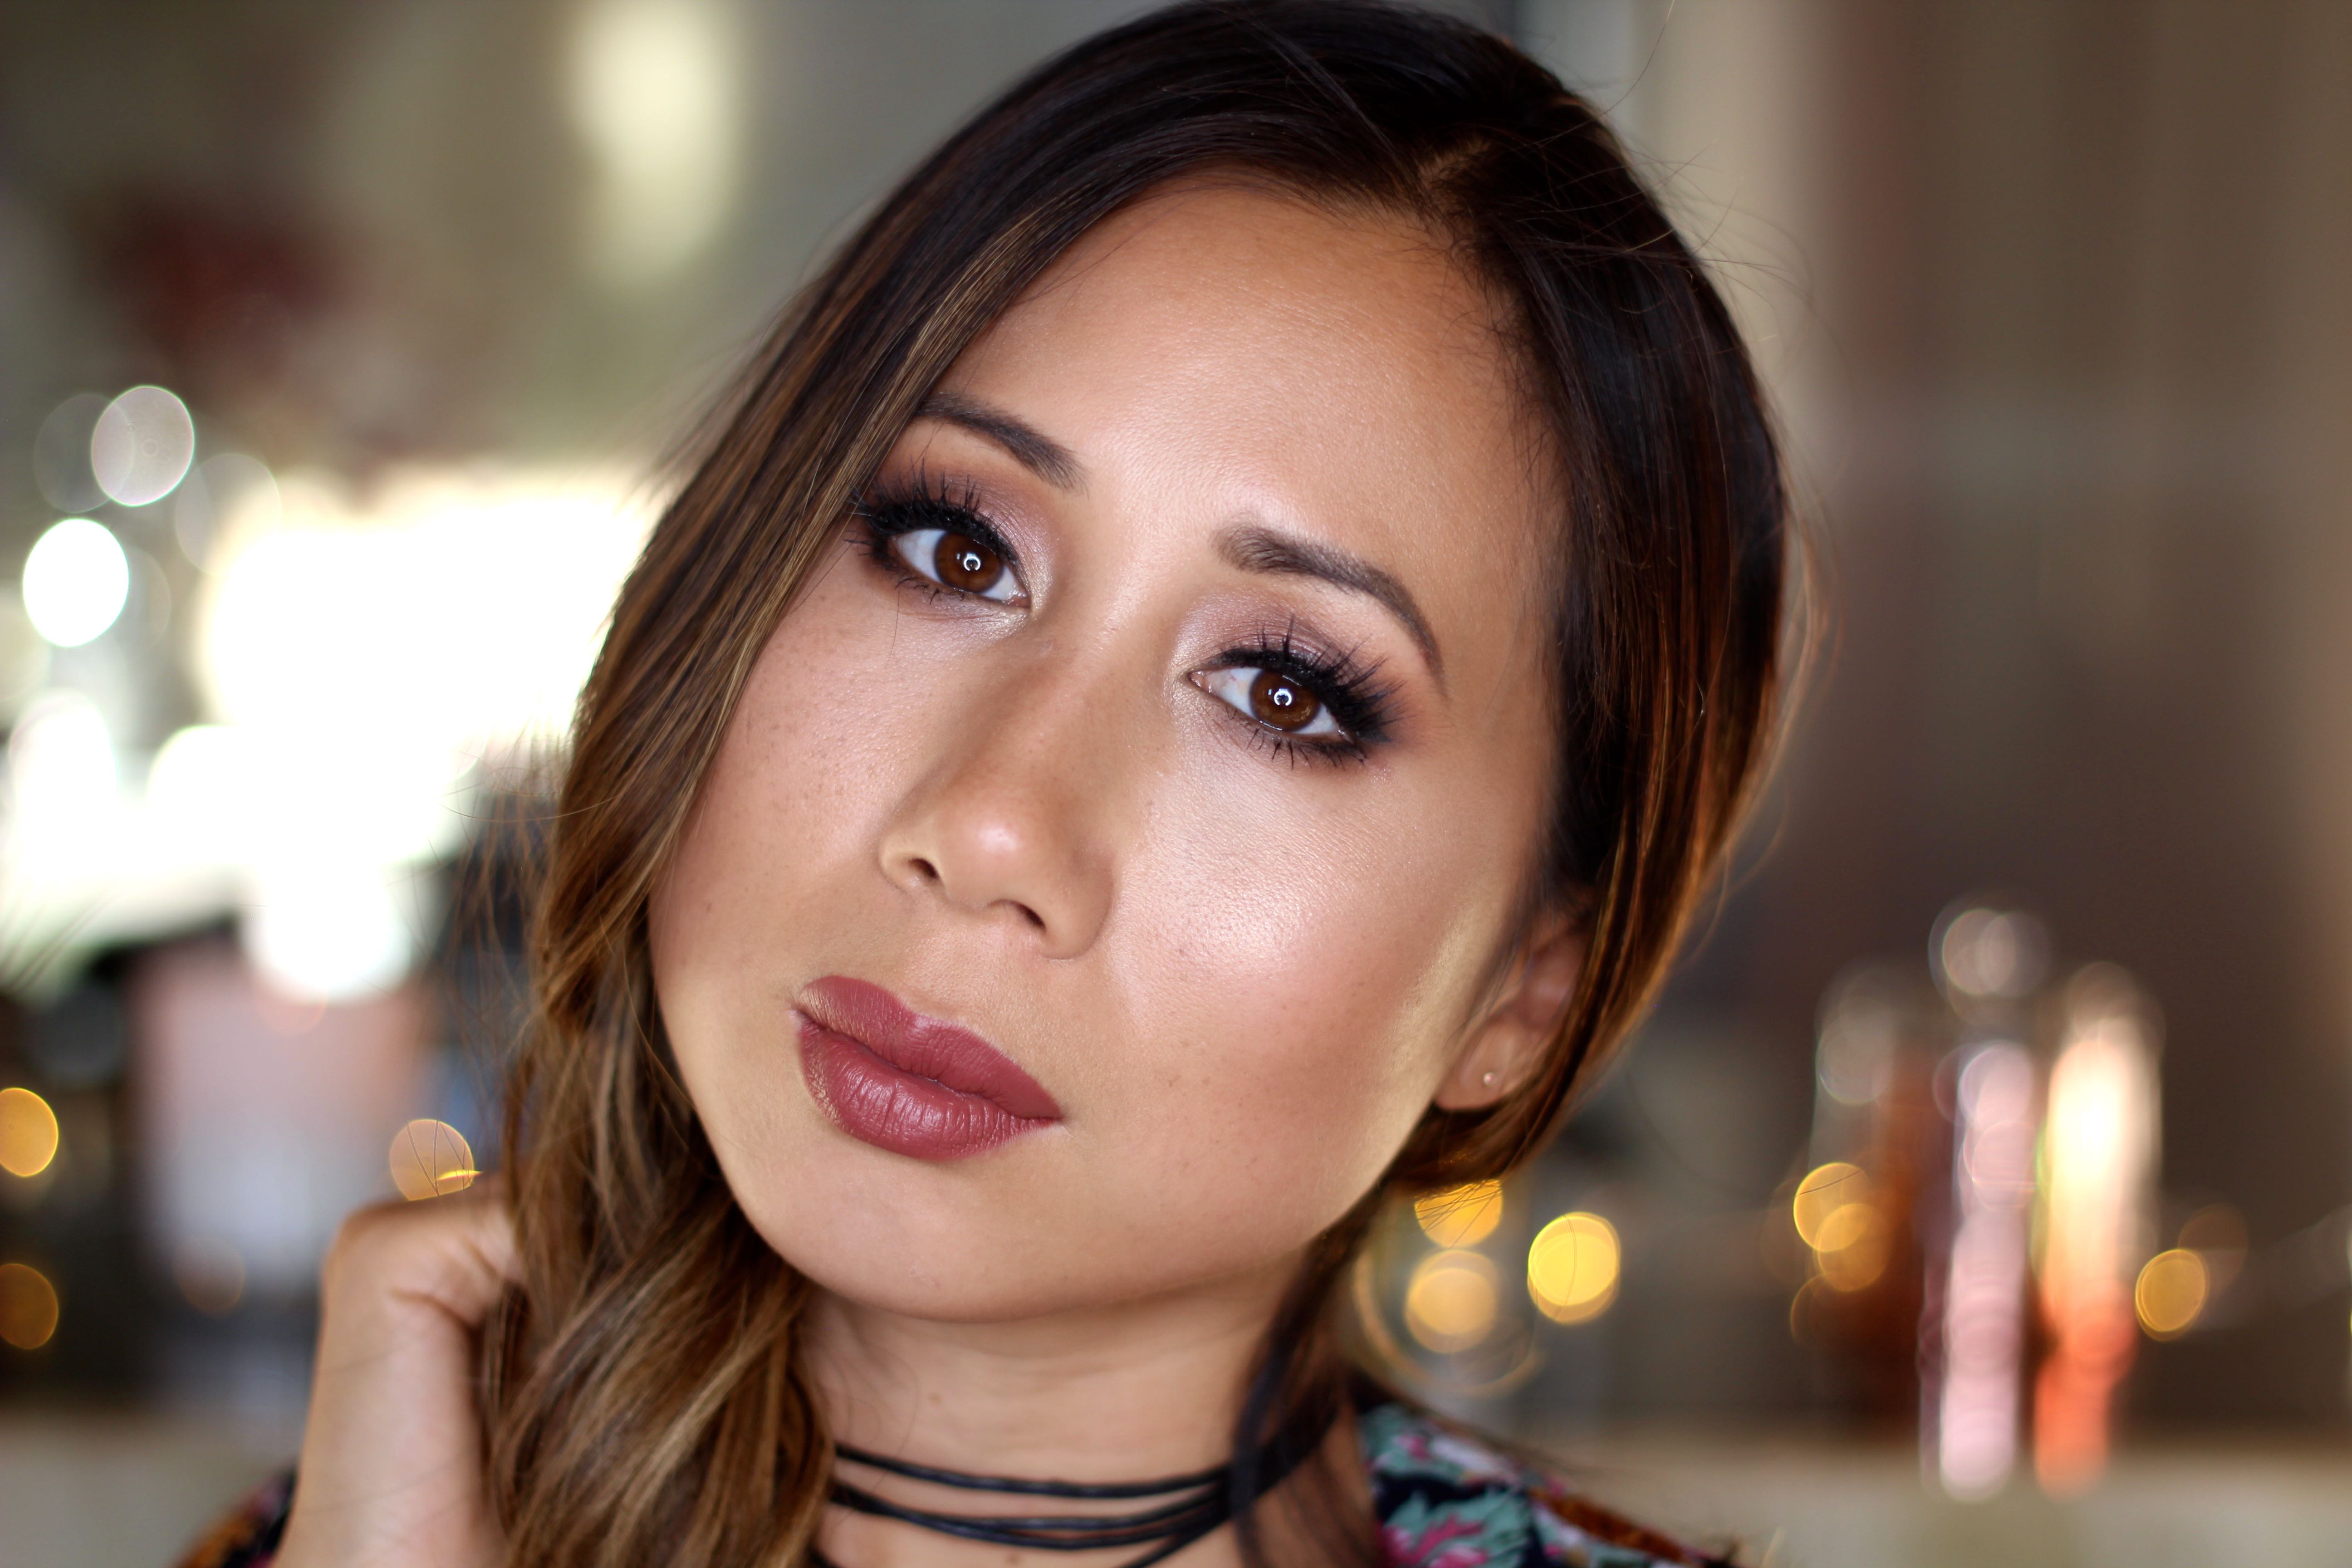 90's Inspired Makeup - Warm, Neutral Tones & Glowy Skin by @Facemadeup